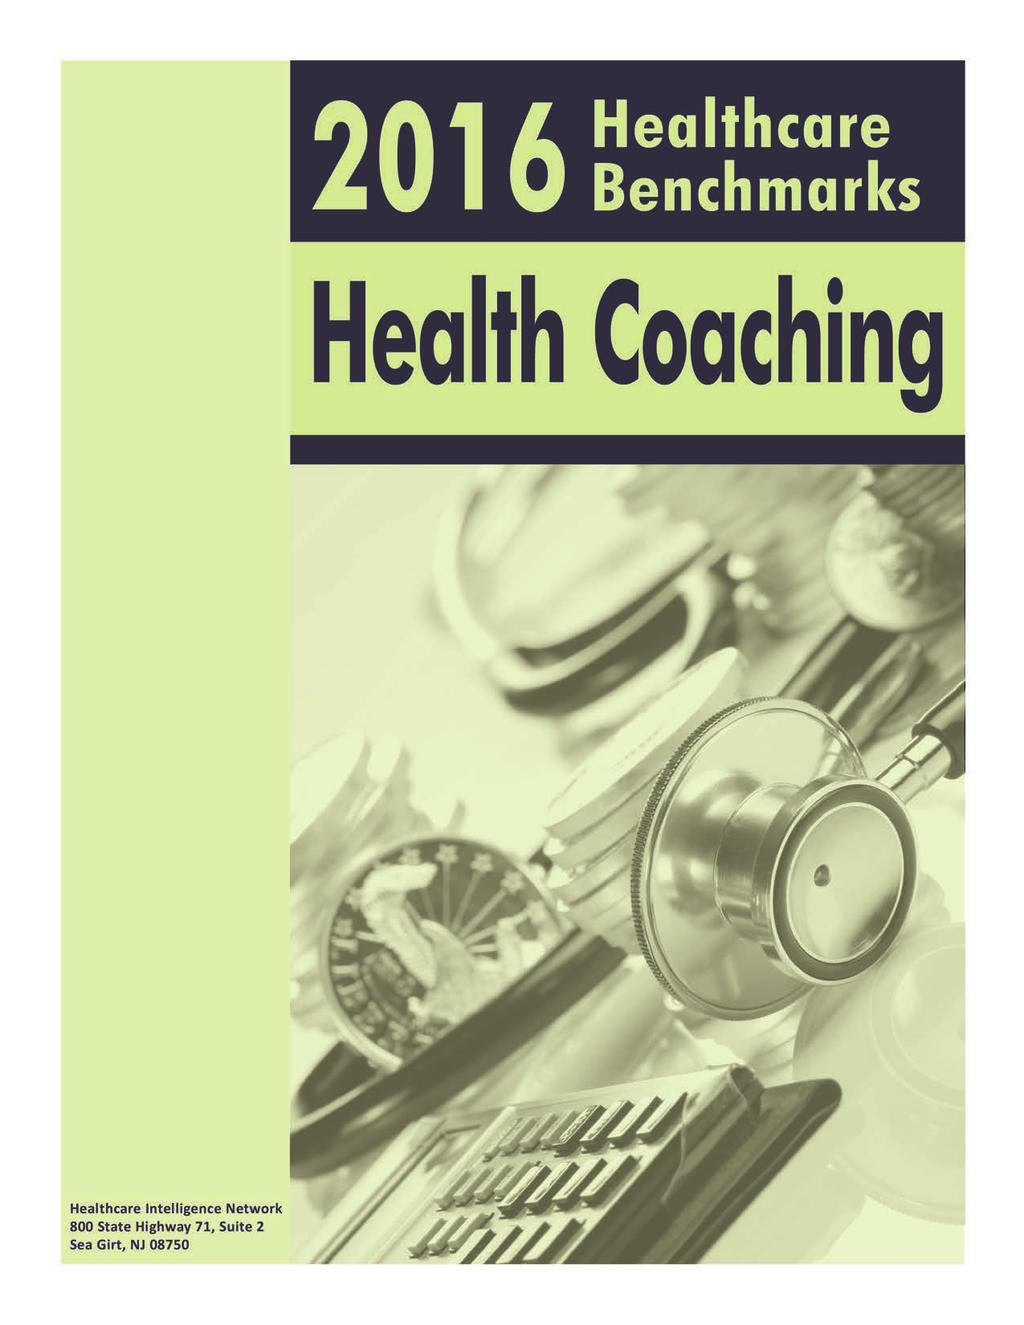 Note: This is an authorized excerpt from 2016 Healthcare Benchmarks: Health Coaching.